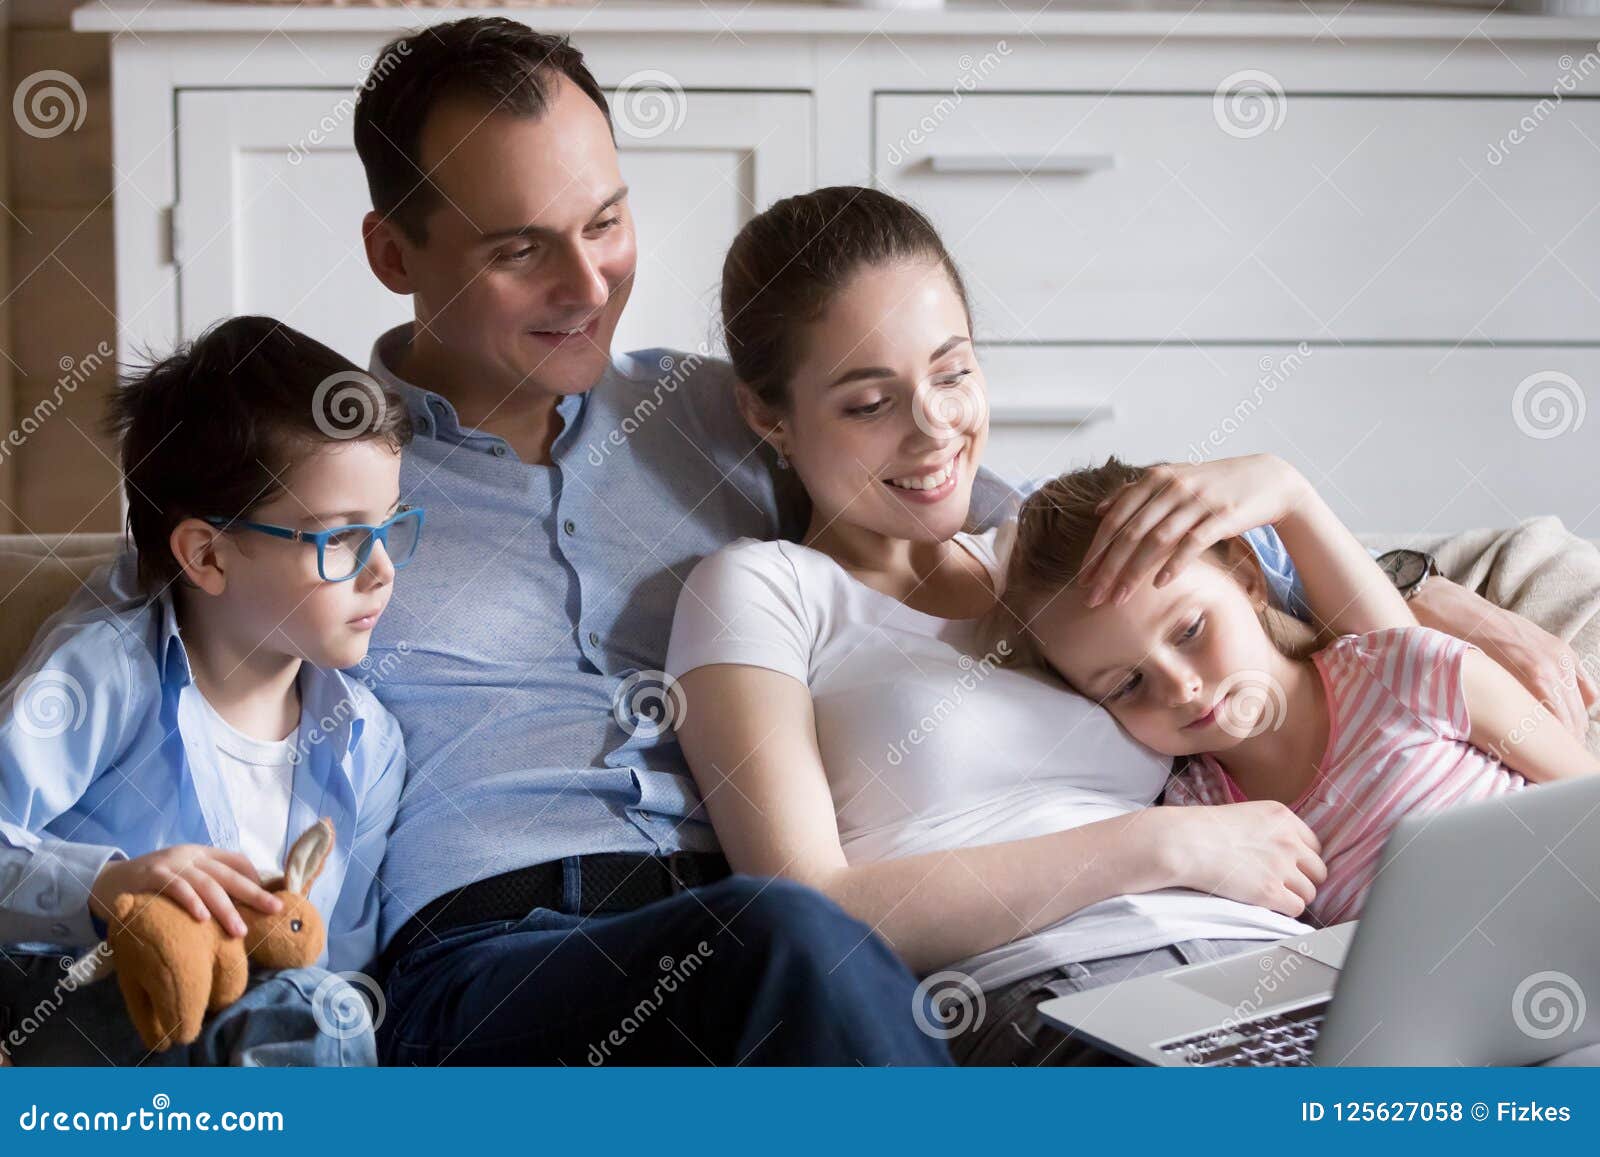 happy family relax in living room watching cartoons on laptop